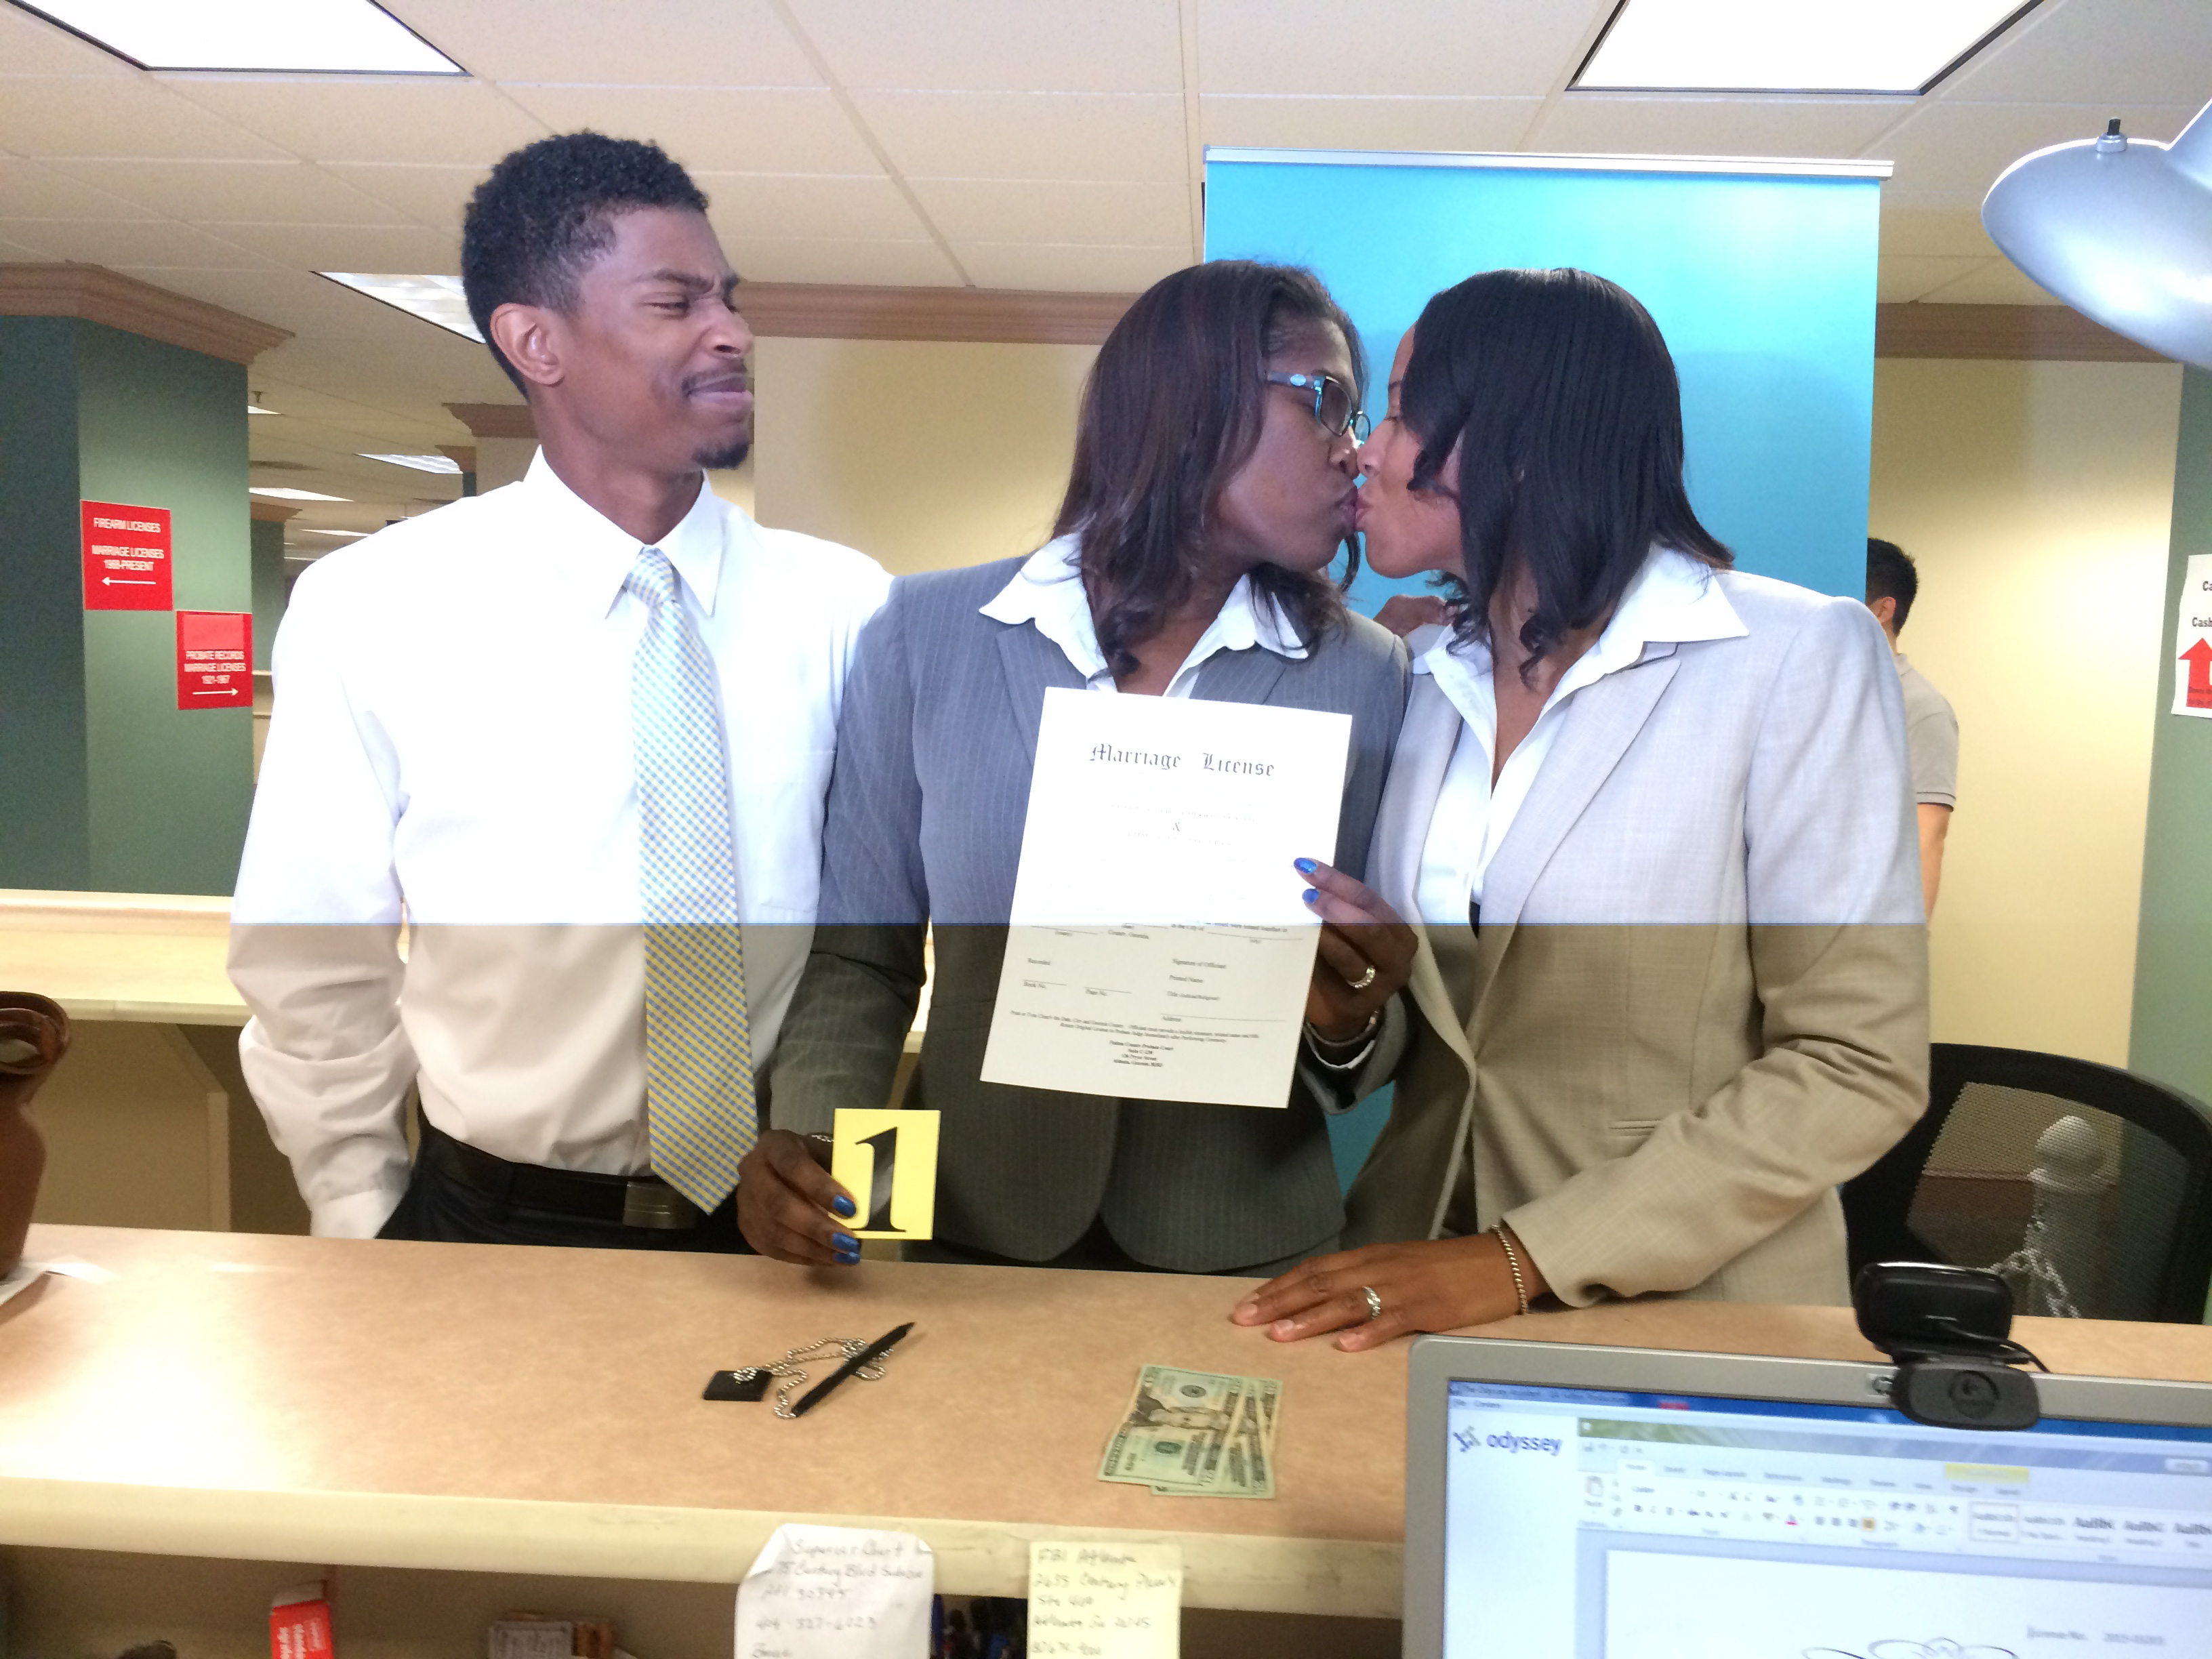 Same-sex couples tie the knot after Supreme Court decision